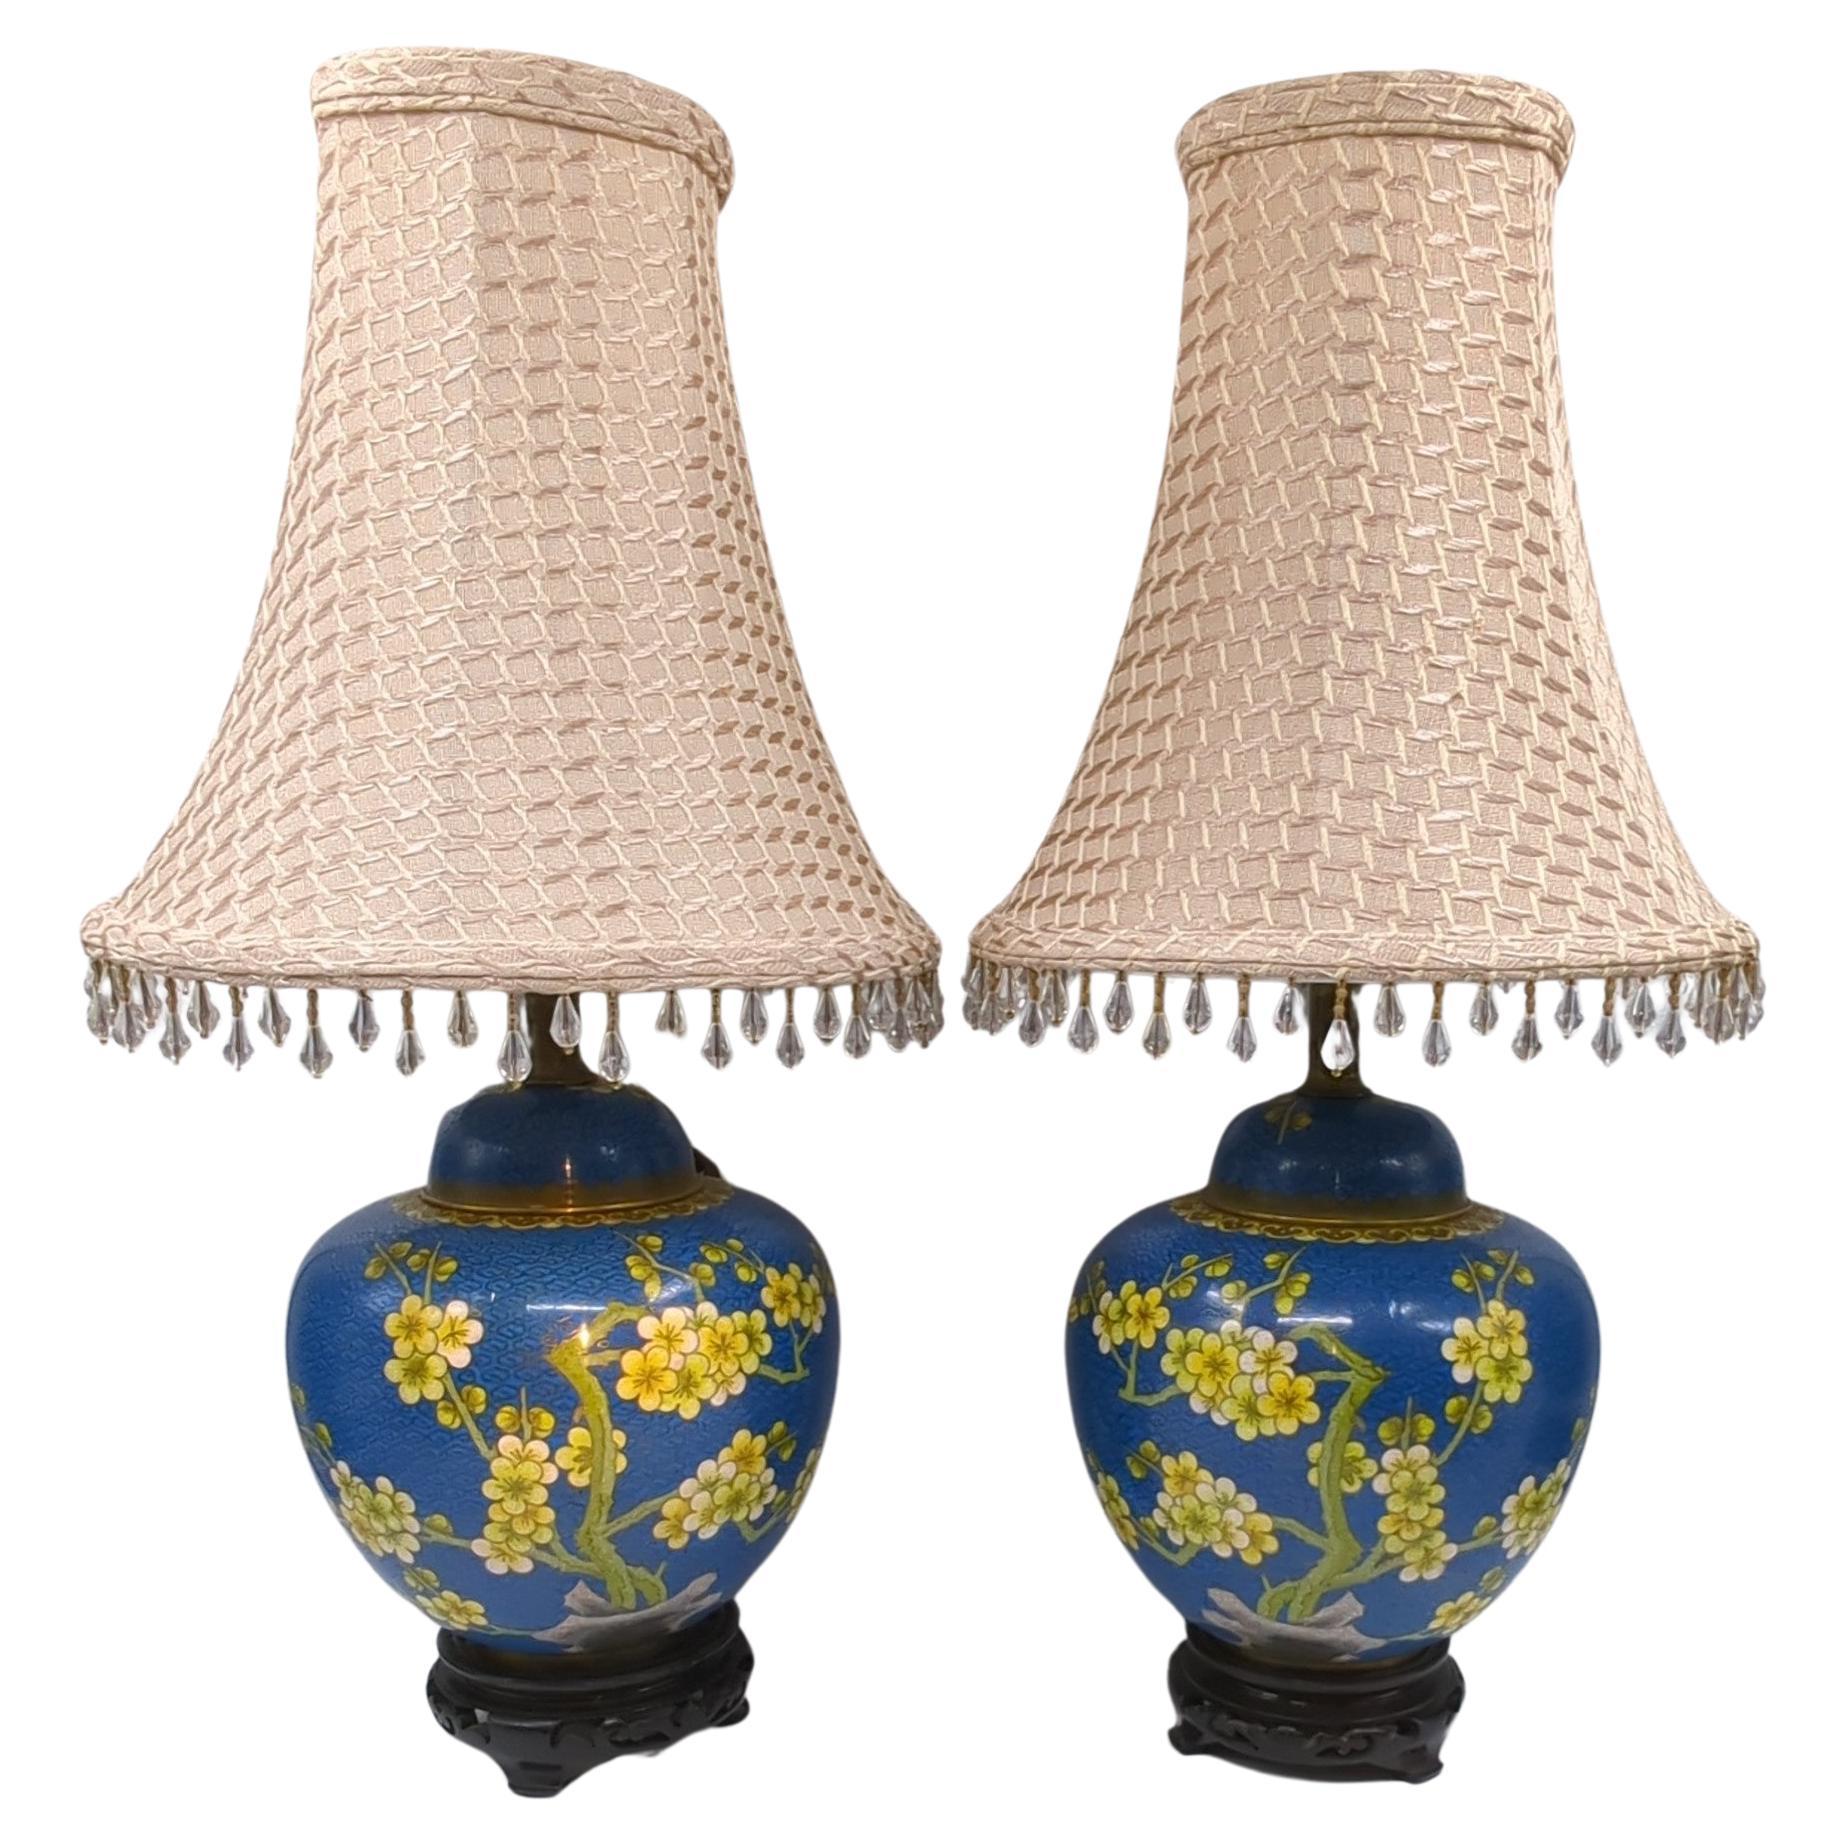 Pair Antique 19c Chinese Gilt Cloisonne Covered Prunus Ginger Jar Table Lamps For Sale 7